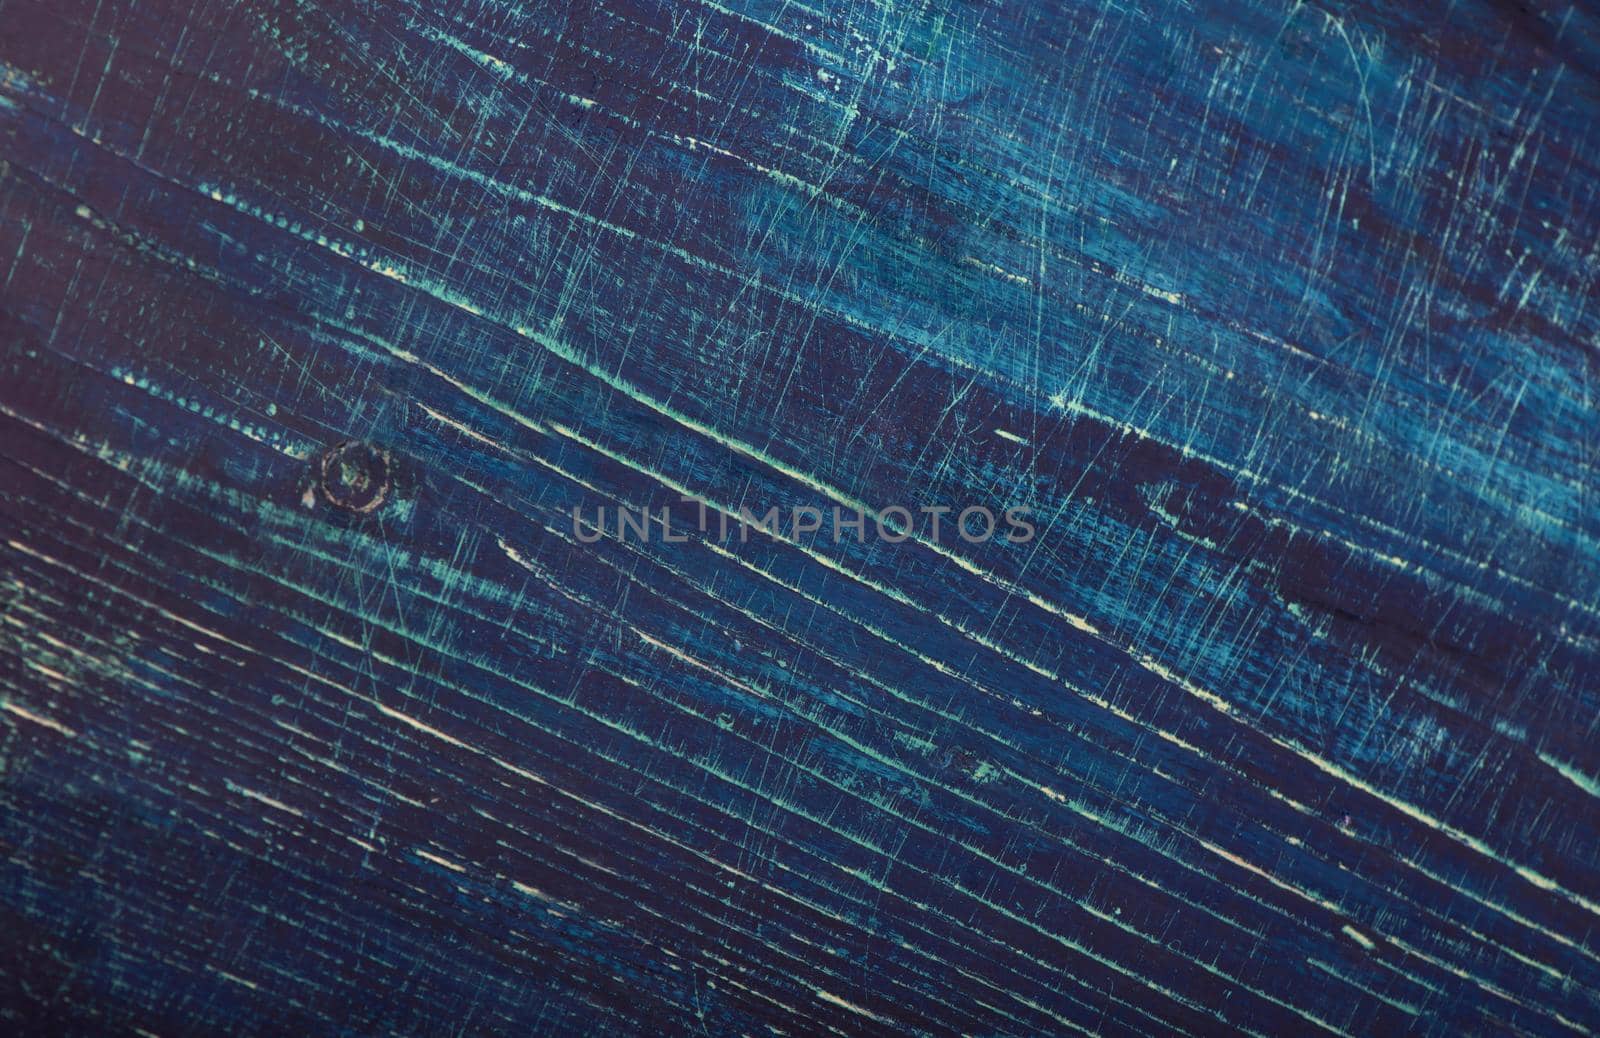 blue rustic woody background of wooden boards